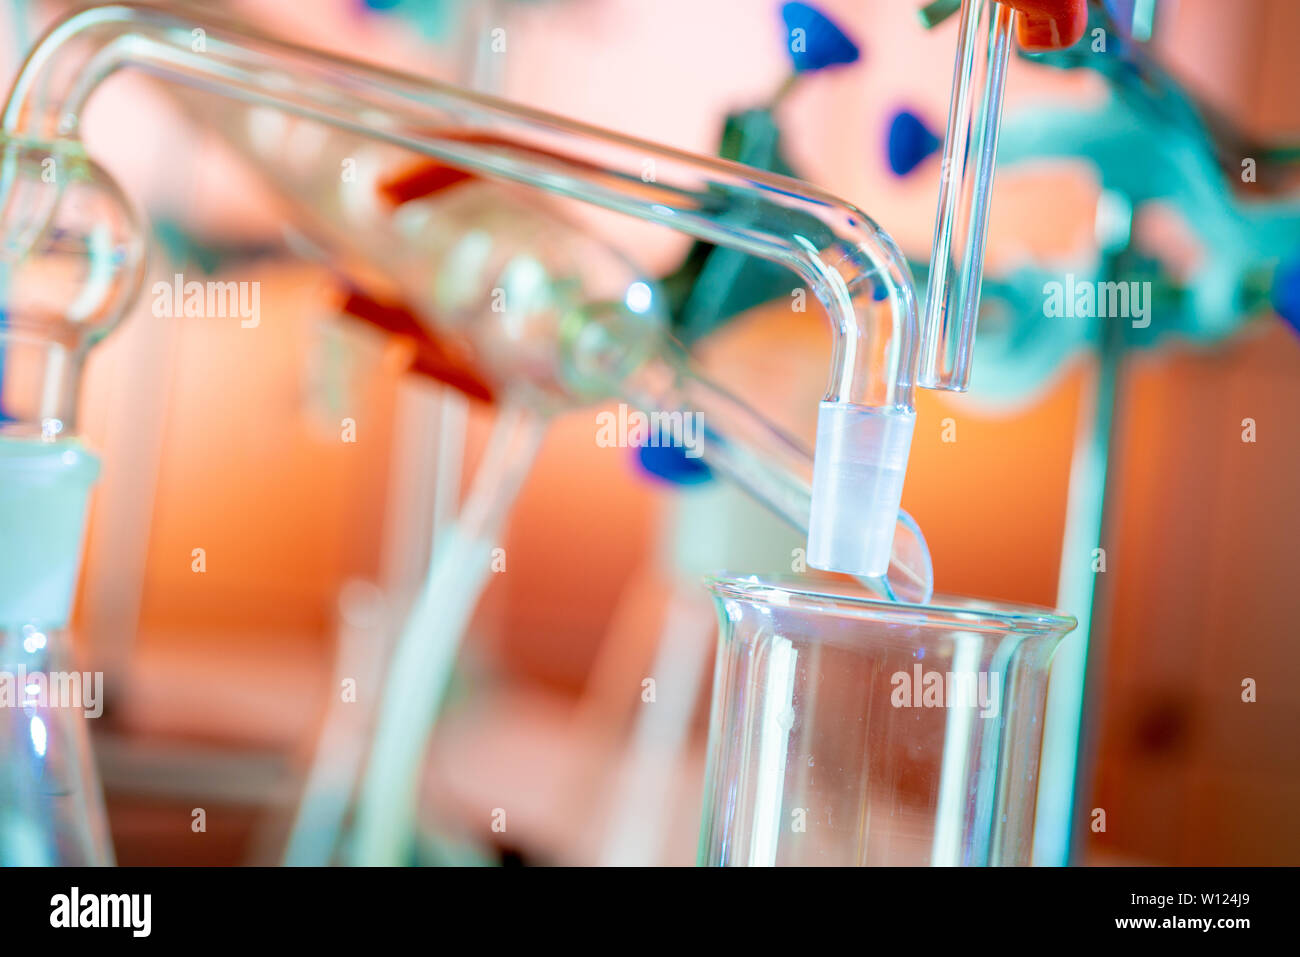 203,426 Laboratory Instruments Images, Stock Photos, 3D objects